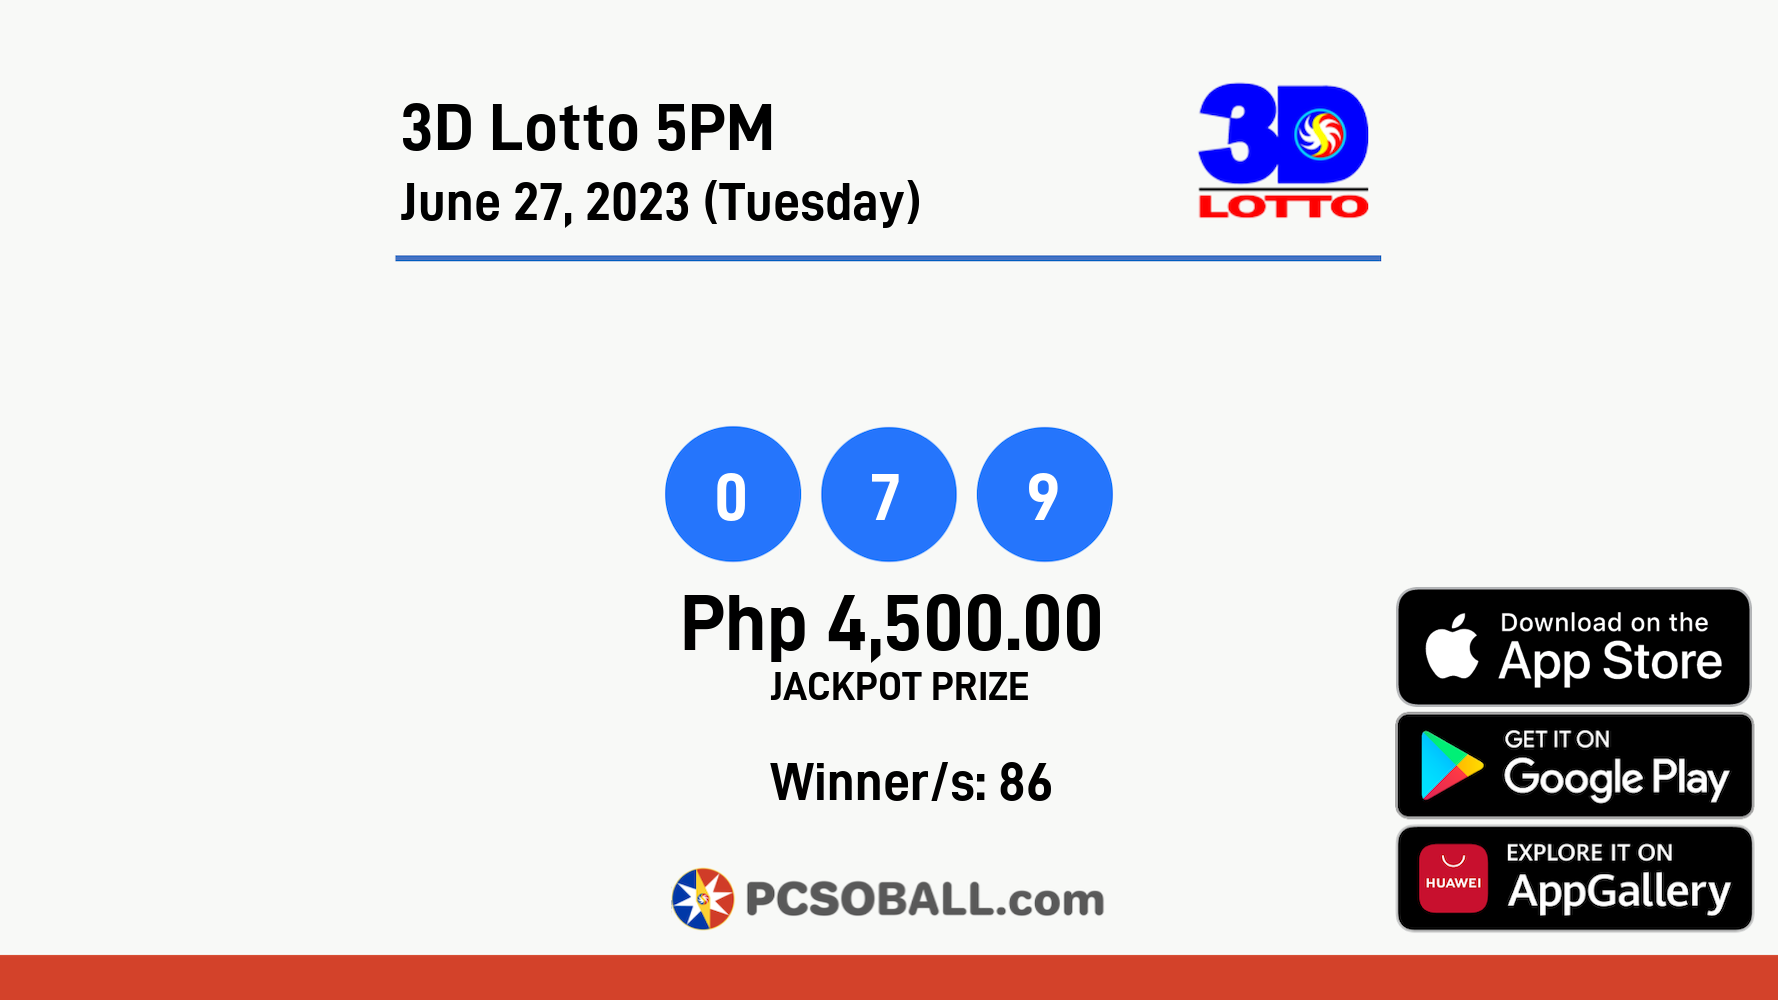 3D Lotto 5PM June 27, 2023 (Tuesday) Result